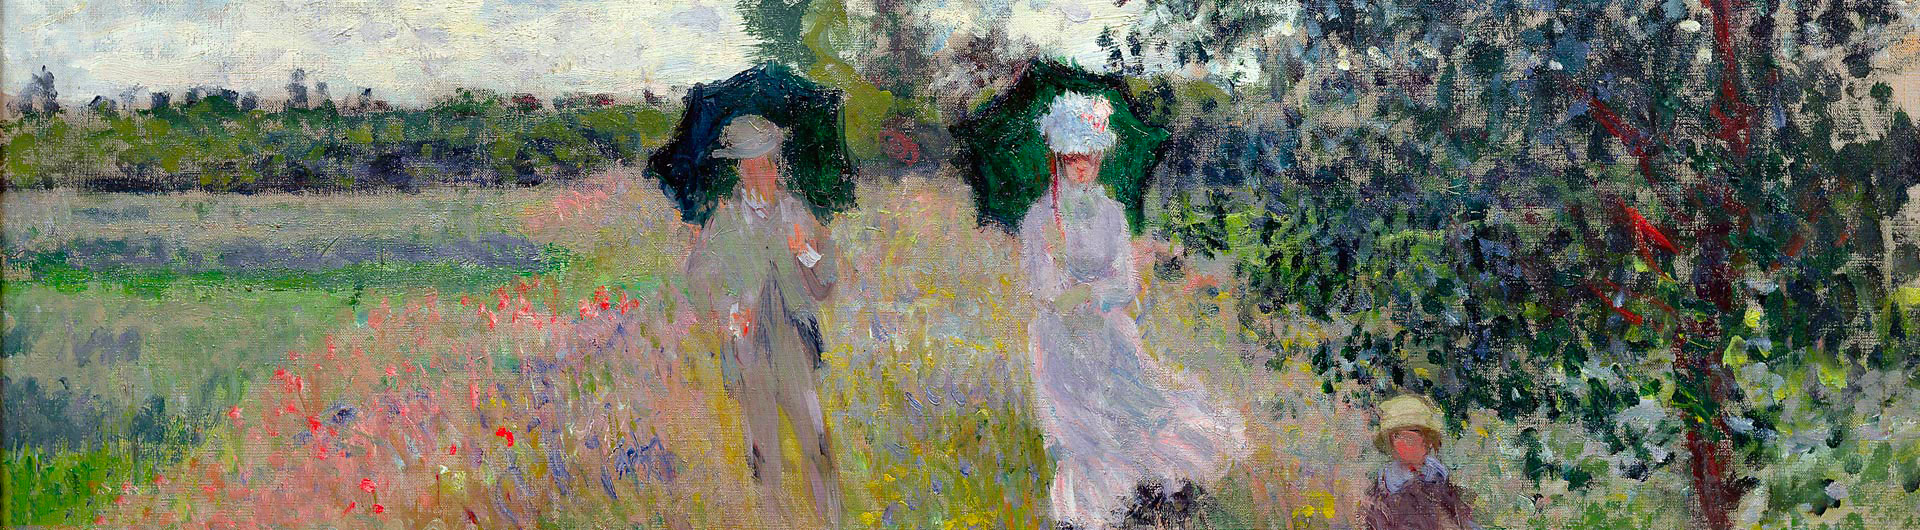 Guided tour of the musée Marmottan Monet